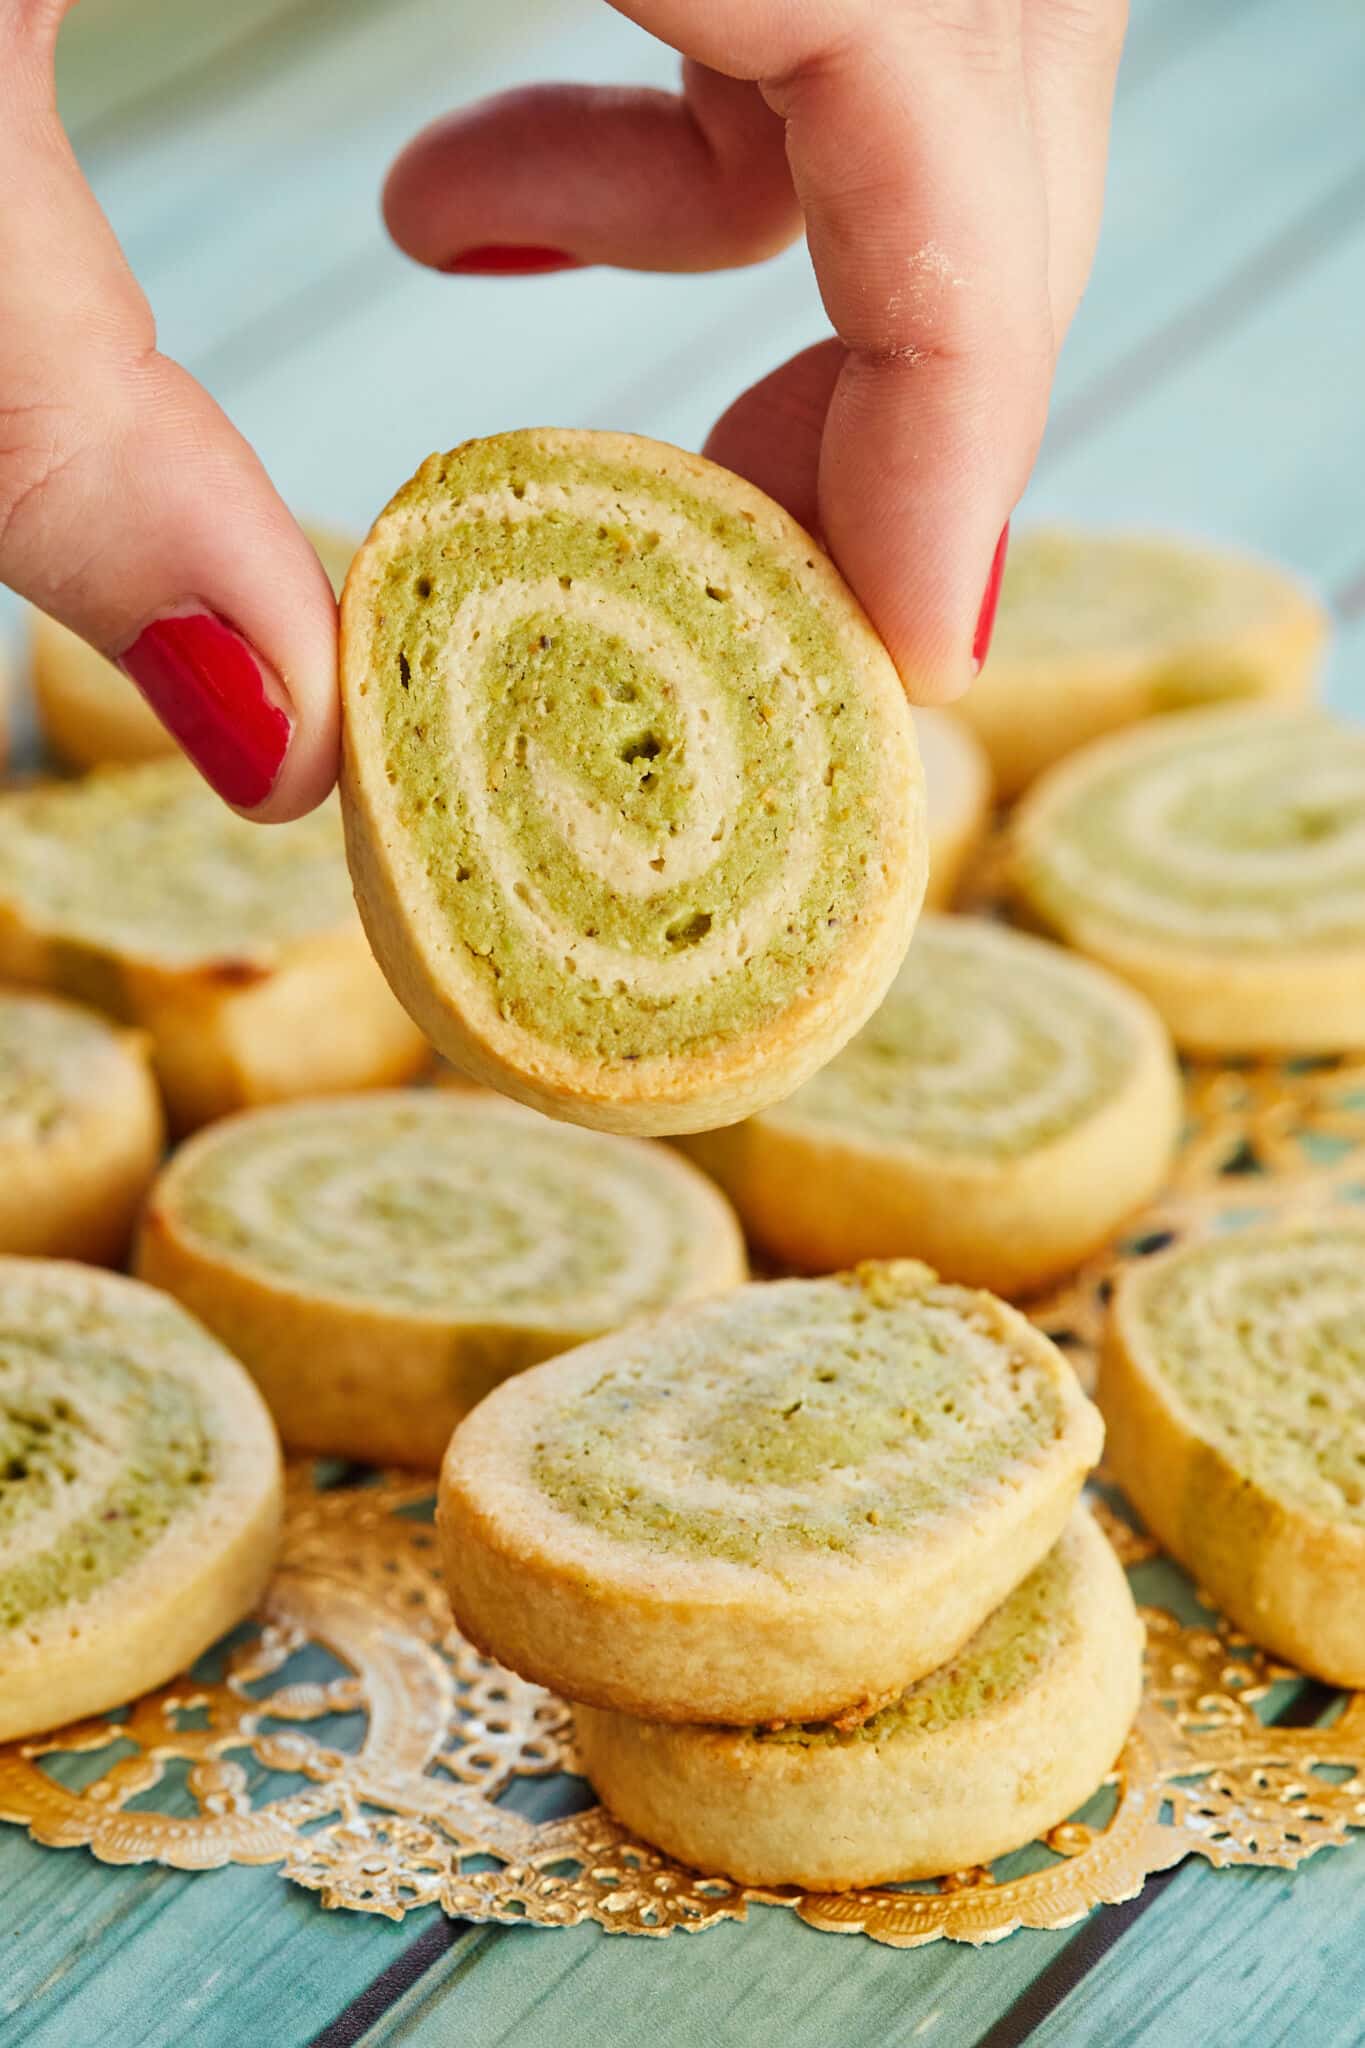 A hand holding an individual roll, with a batch of kaju pista rolls laid out on a gold doily, on a wooden table.